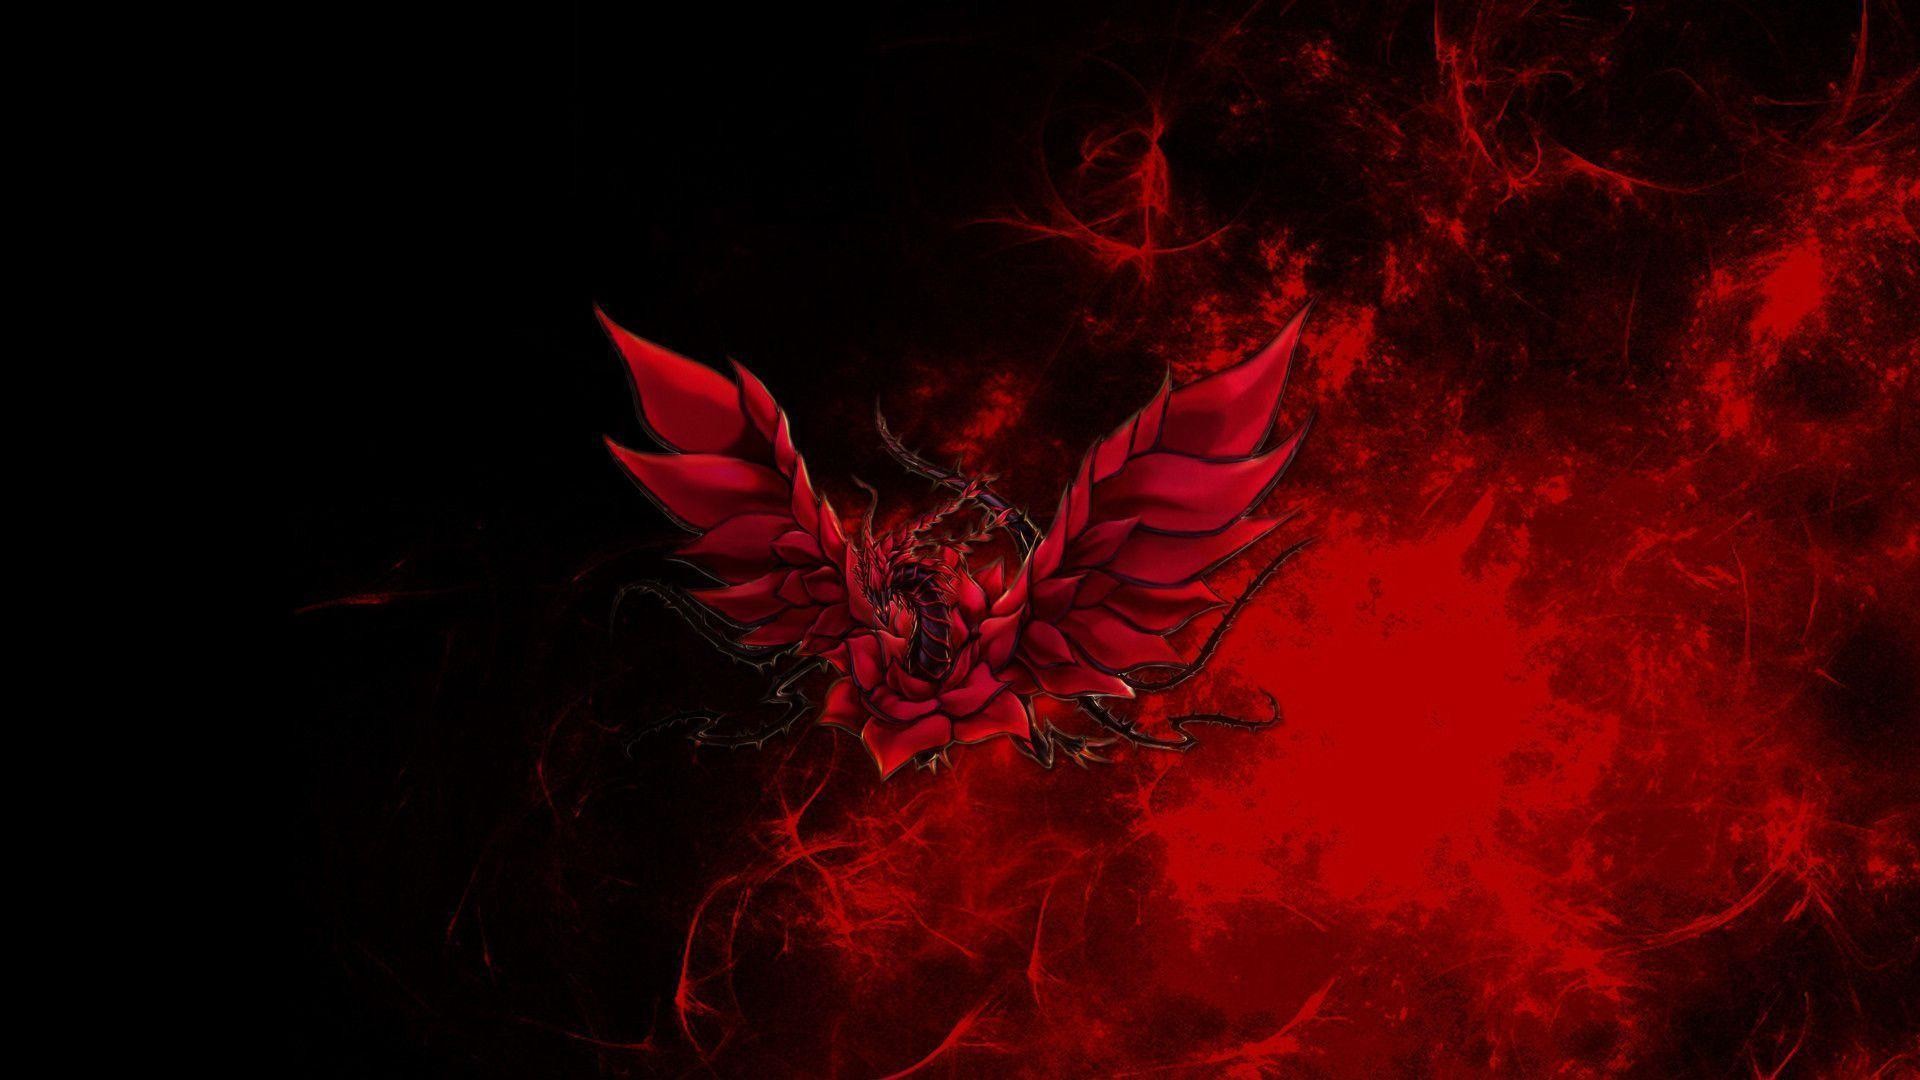 1920x1080 PreviousNext. Previous Image Next Image. hd red and black dragon wallpaper  ...